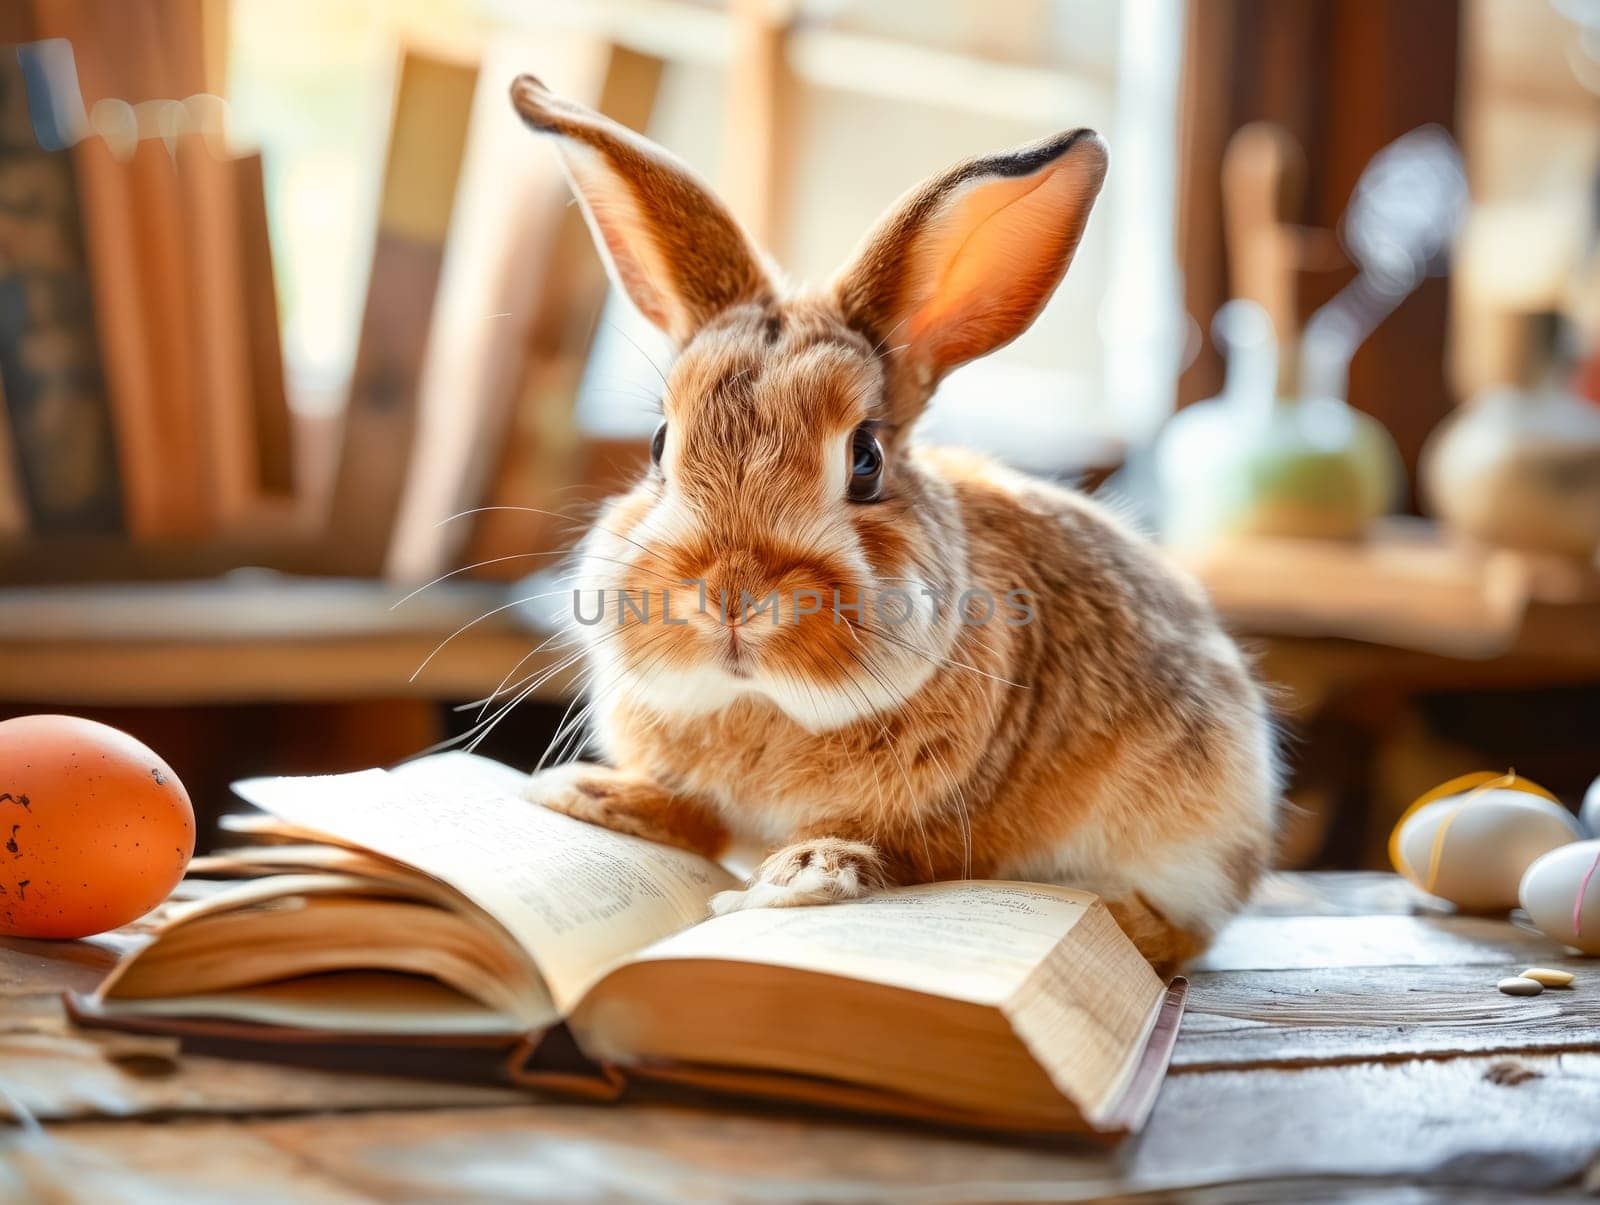 A rabbit is sitting on top of an open book, looking at the camera. The scene is playful and lighthearted, with the rabbit seemingly enjoying the attention. The presence of the book. Generative AI